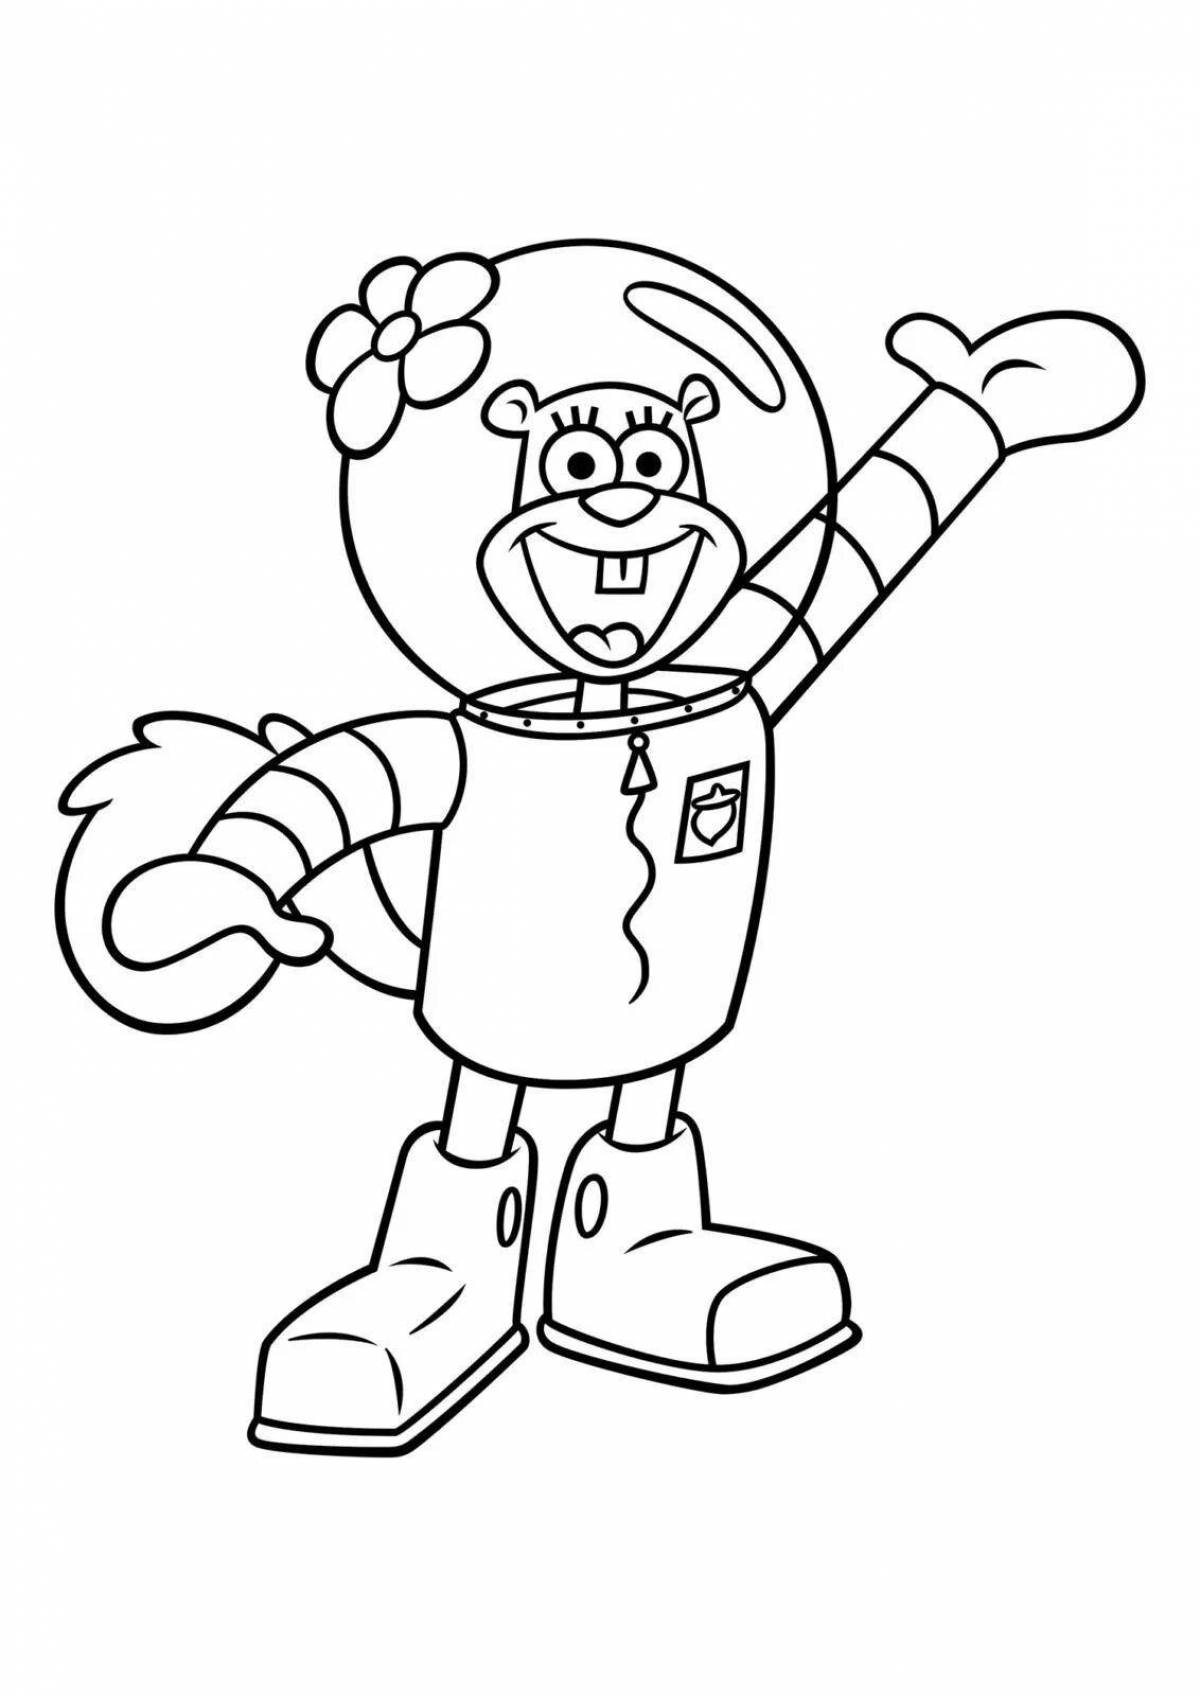 Exciting sandy coloring page